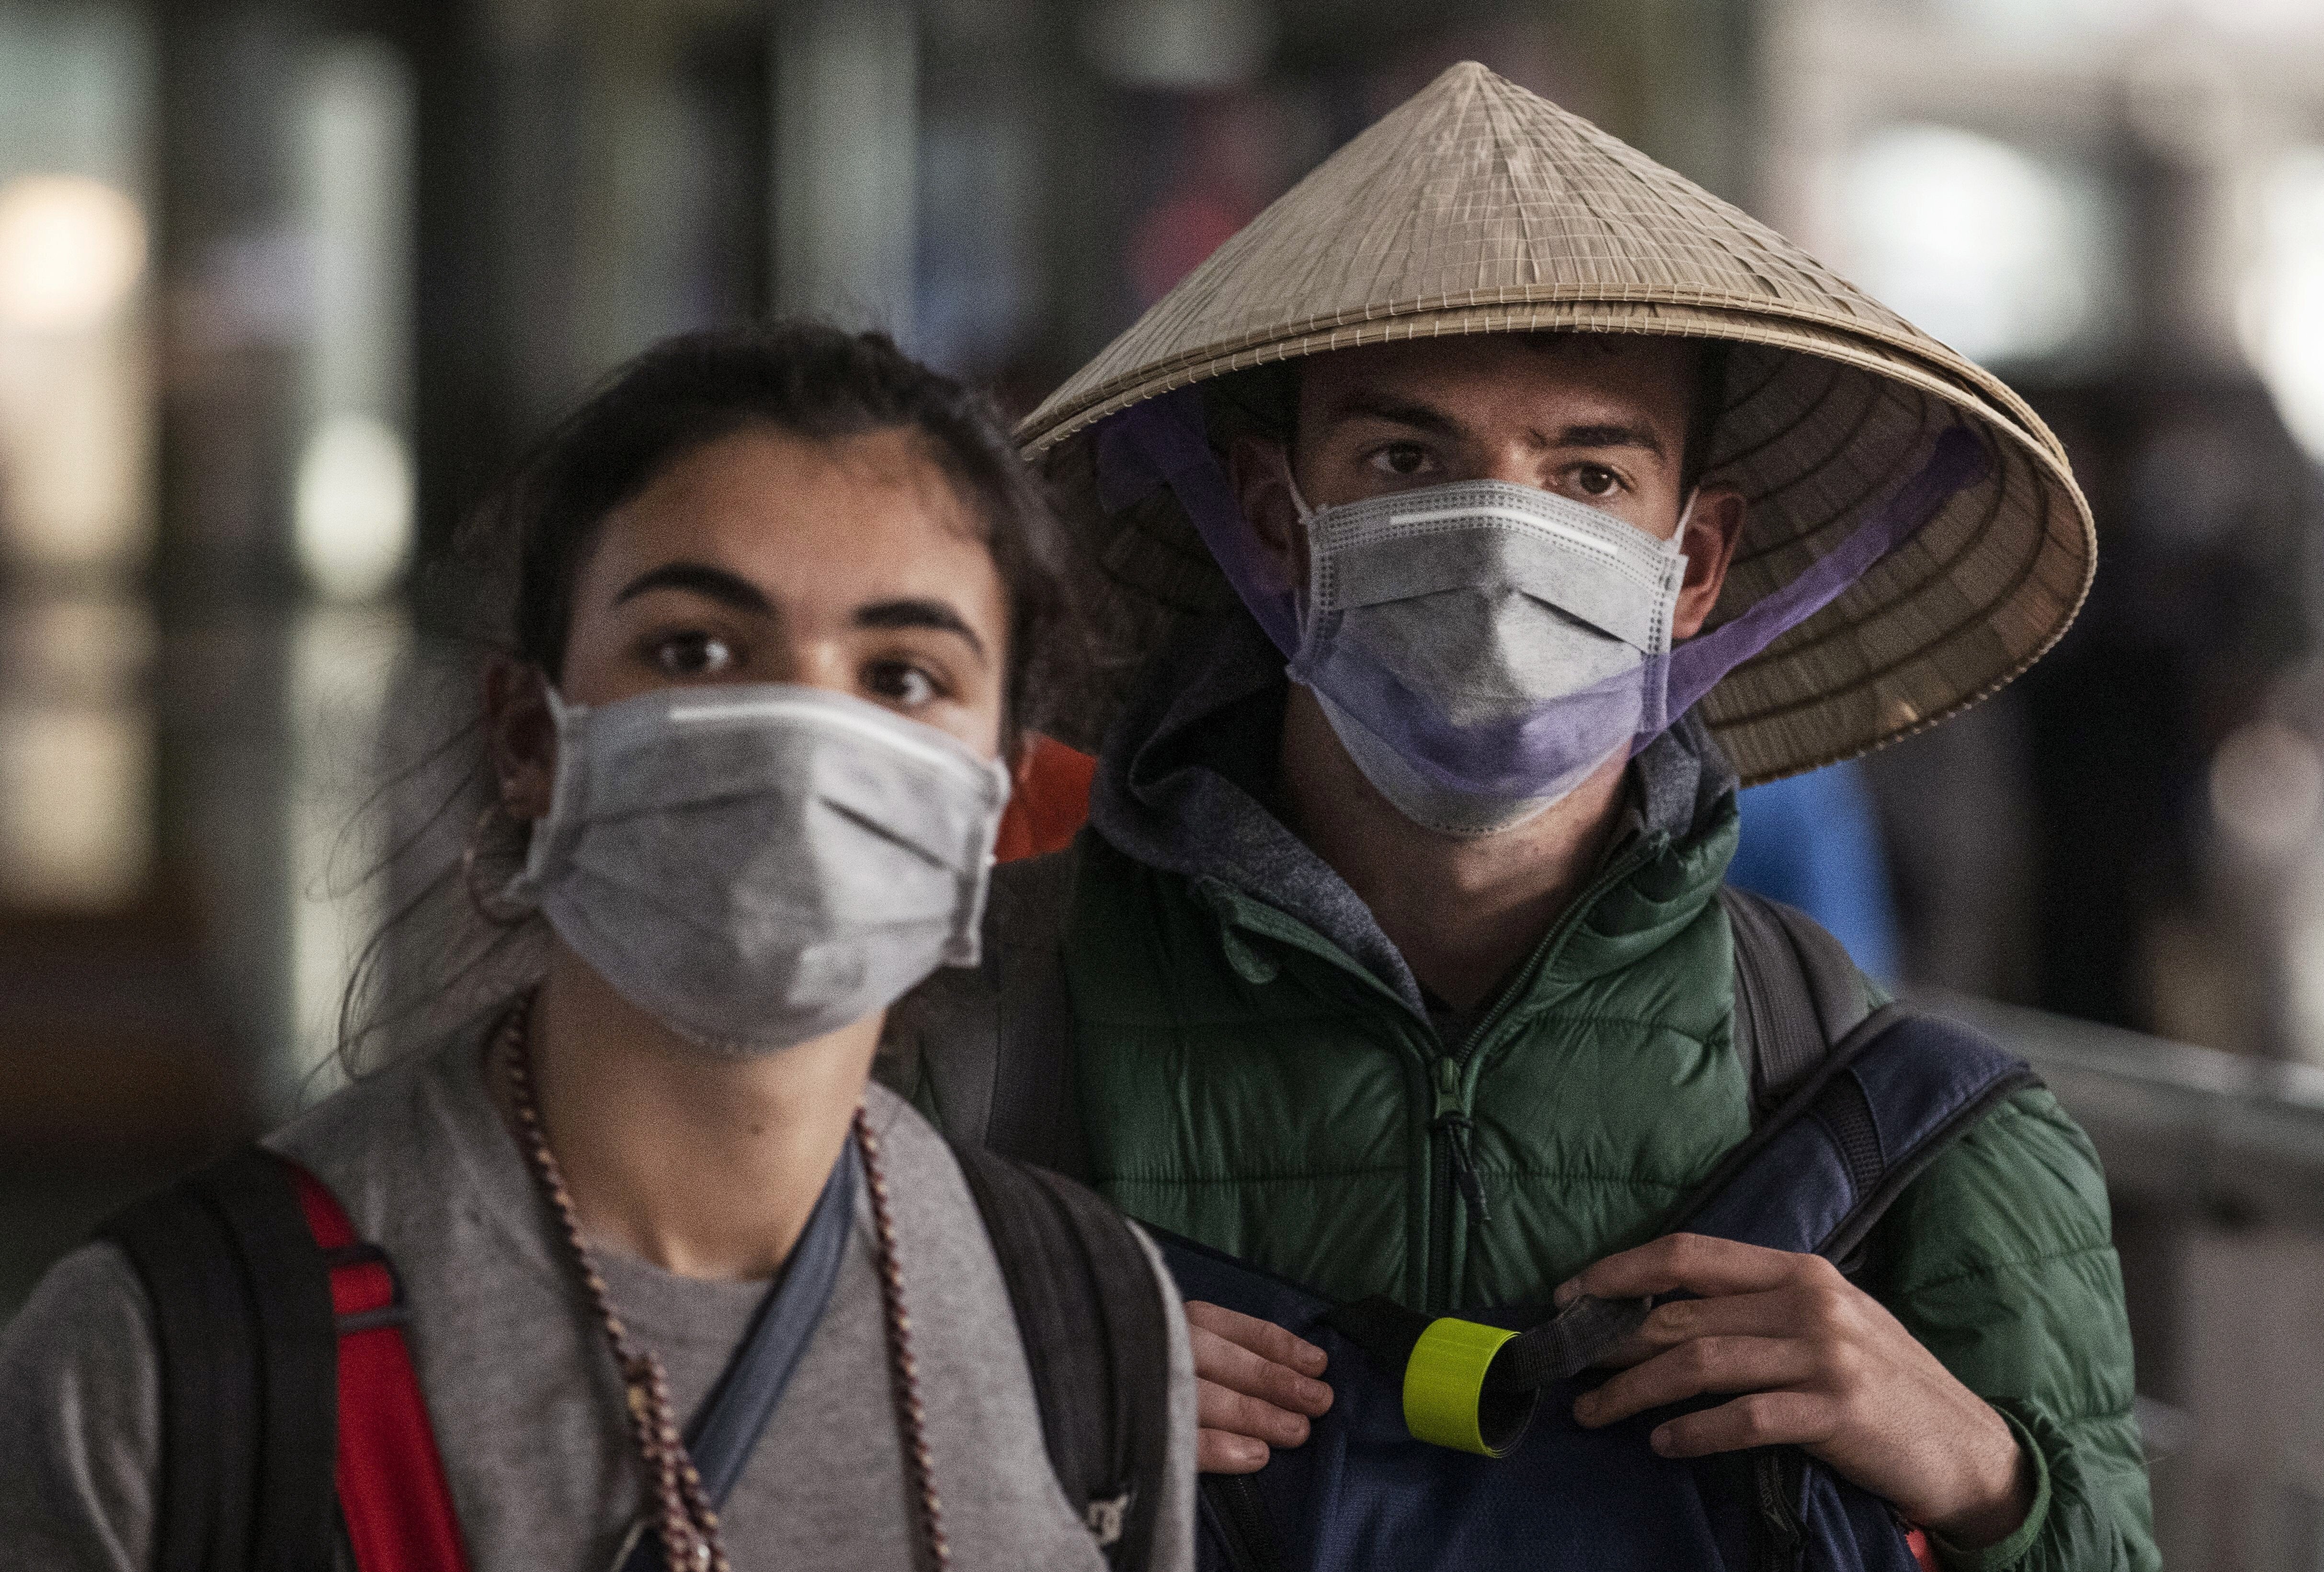 Travel industry professionals believe that post-pandemic travel is going to be essential for the millions affected by the shutdown of tourism. Photo: Getty Images